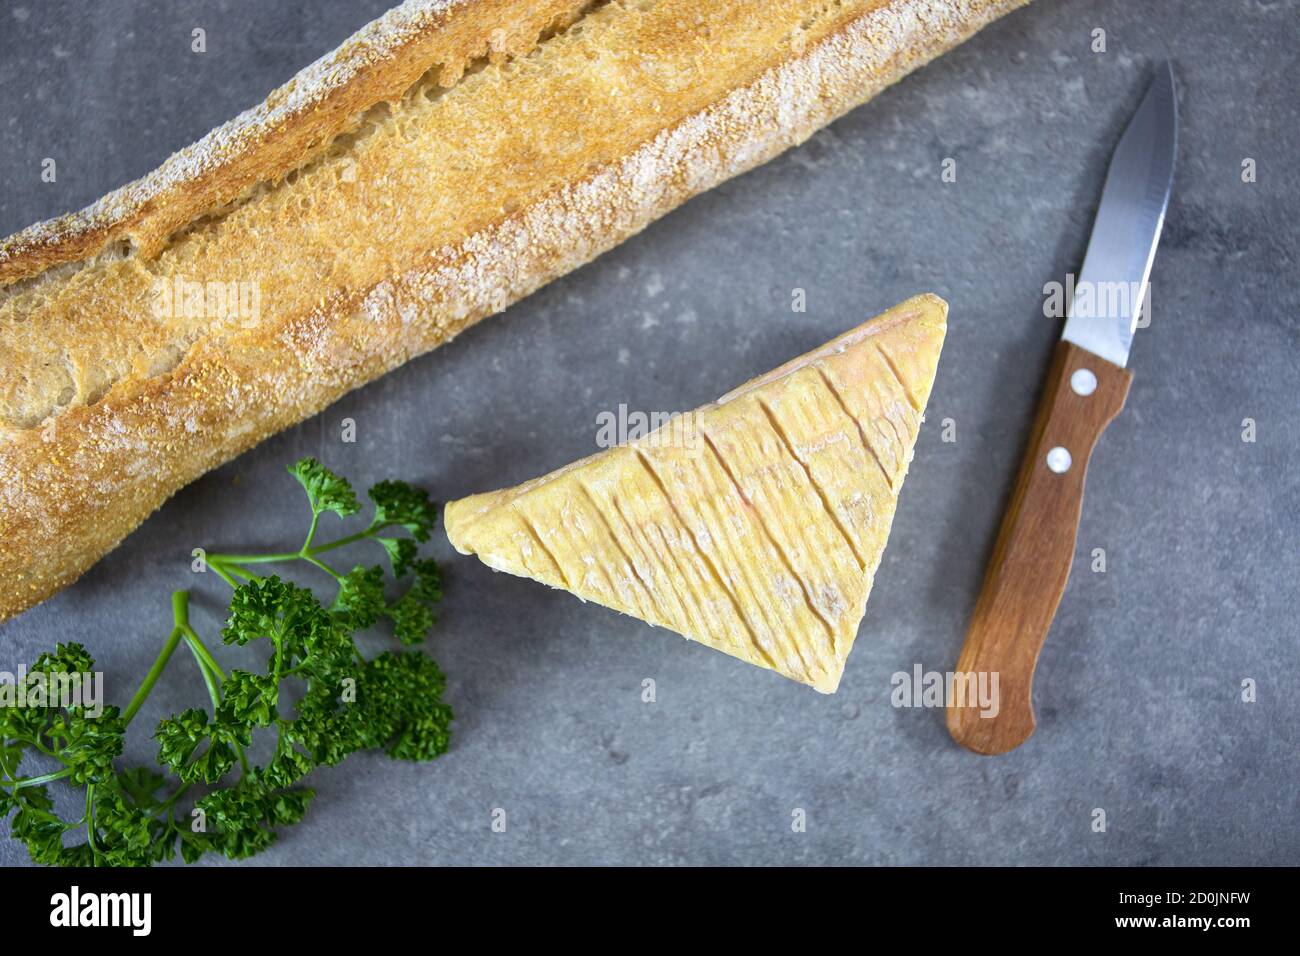 piece of maroilles and baguette Stock Photo